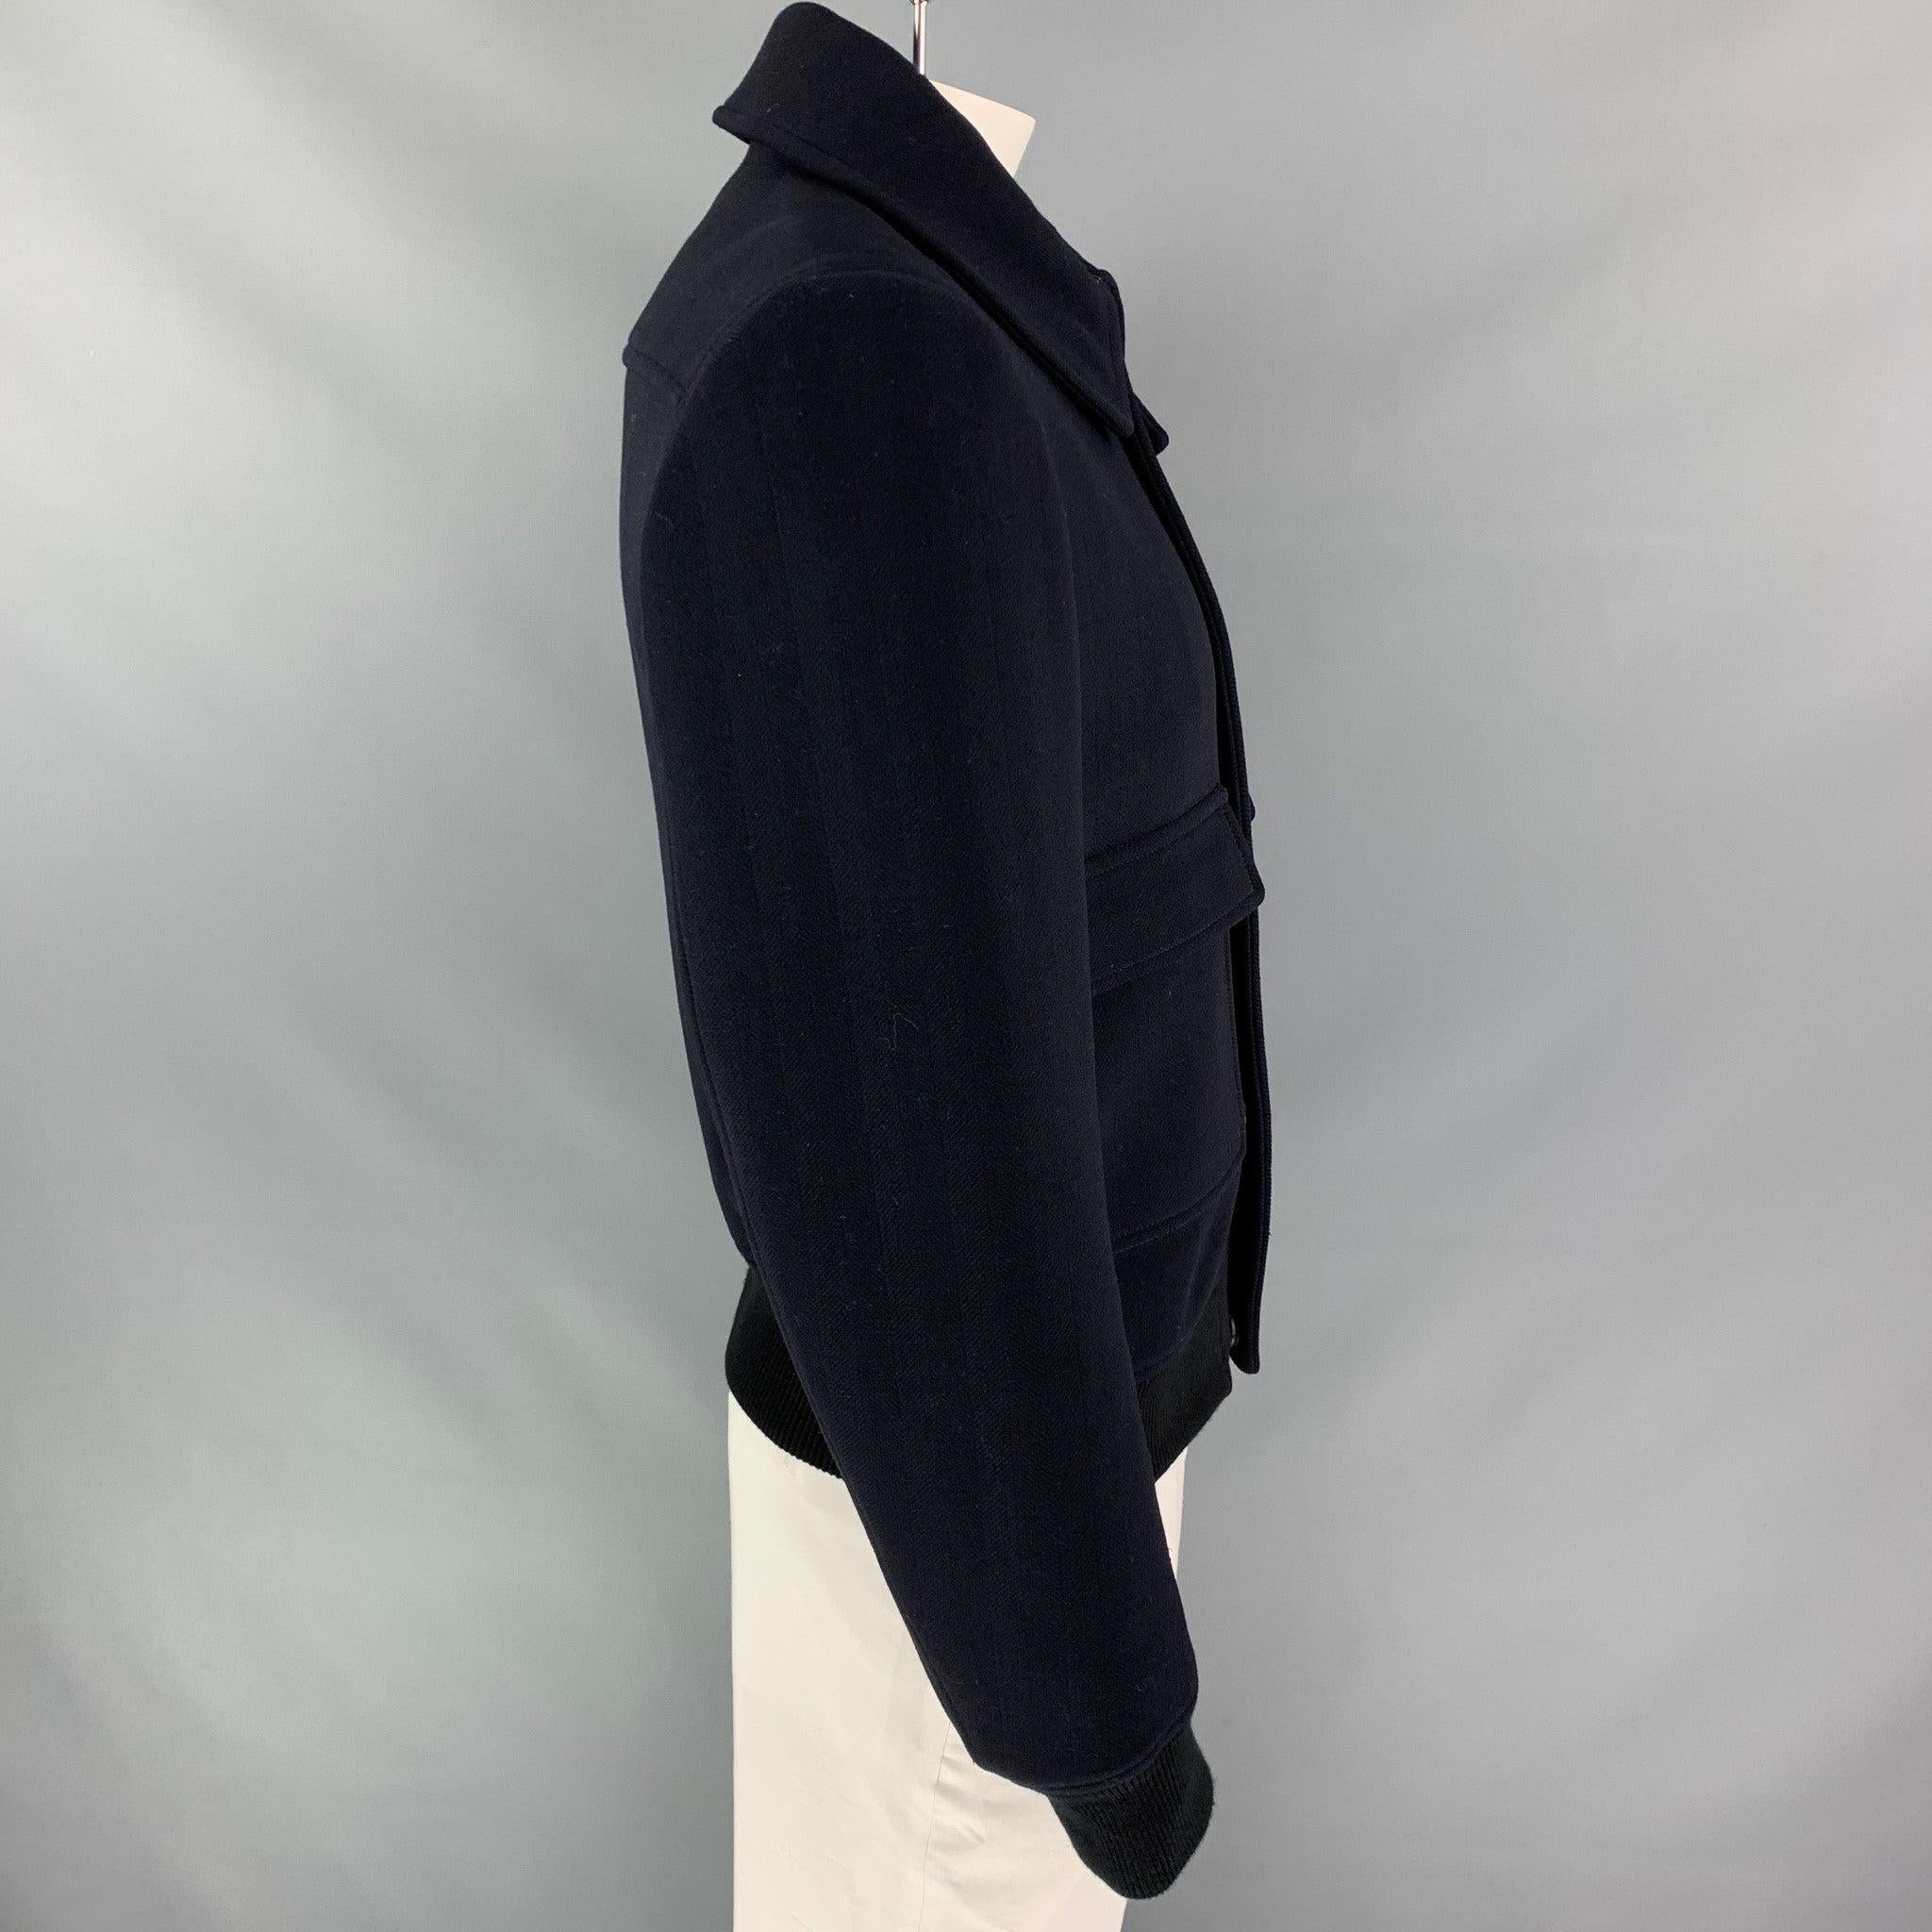 BURBERRY PRORSUM by Christopher Bailey Size 42 Navy Virgin Wool Coat In Good Condition For Sale In San Francisco, CA